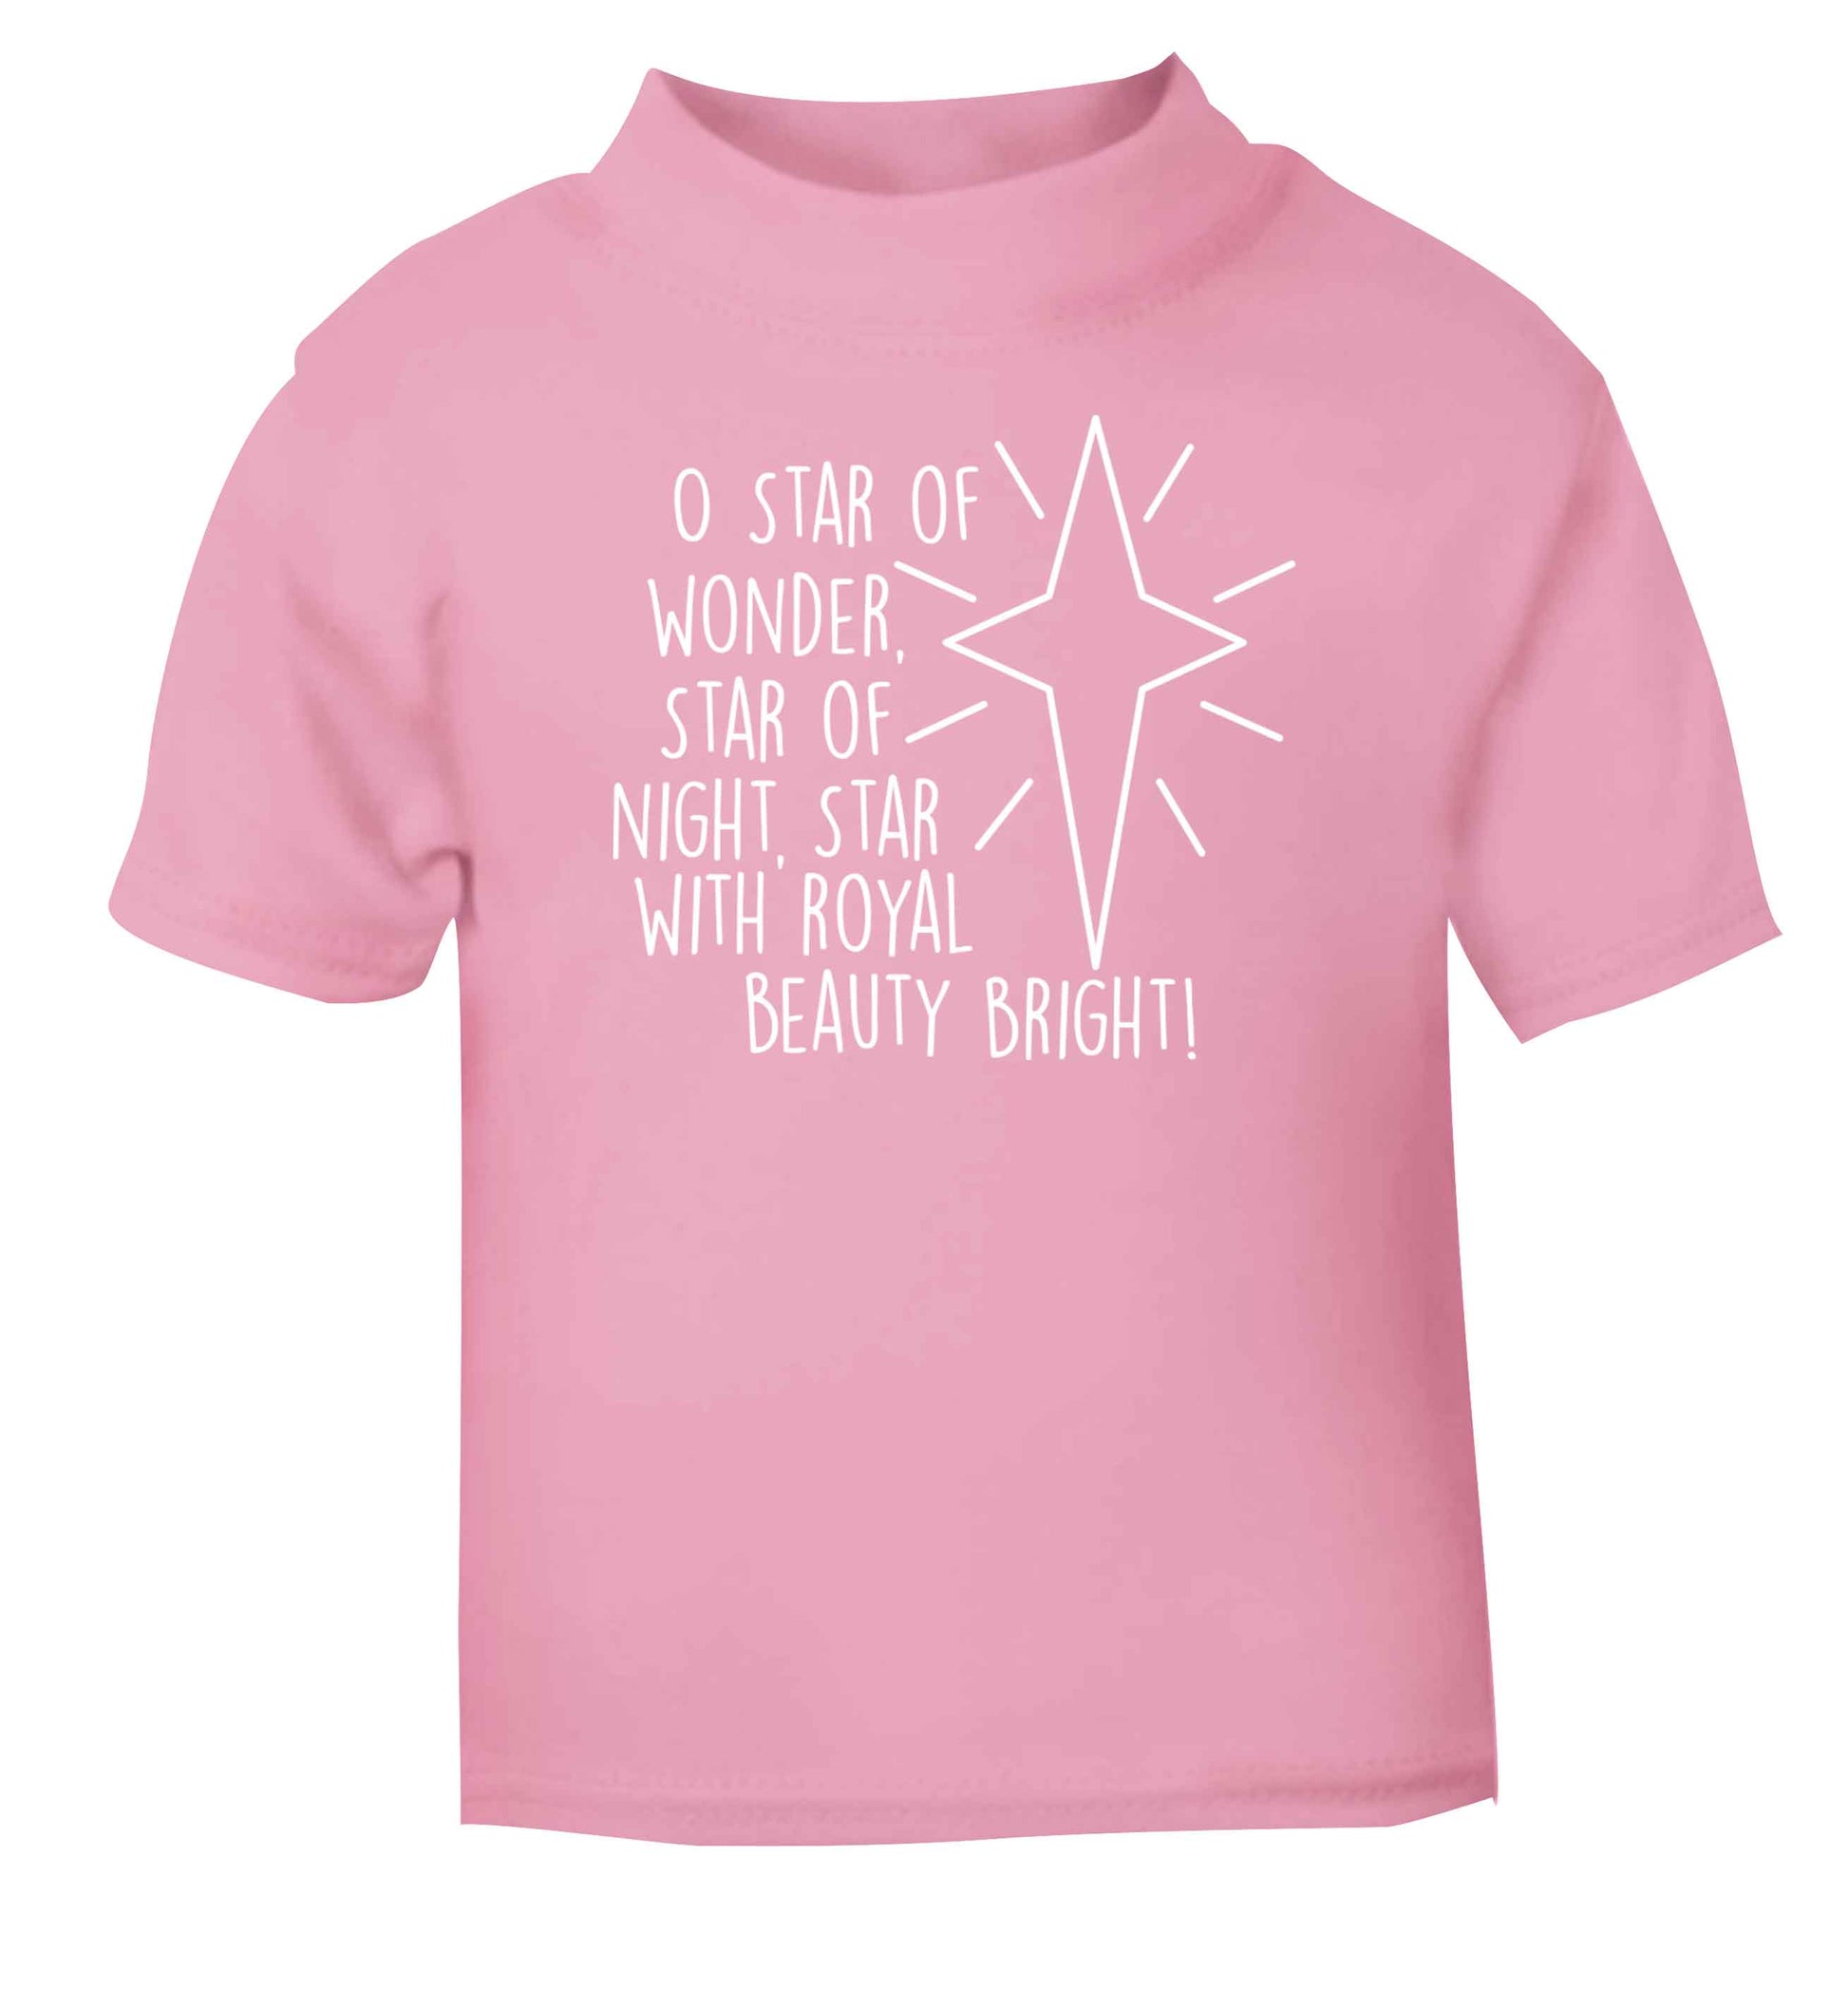 Oh star of wonder star of night, star with royal beauty bright light pink baby toddler Tshirt 2 Years